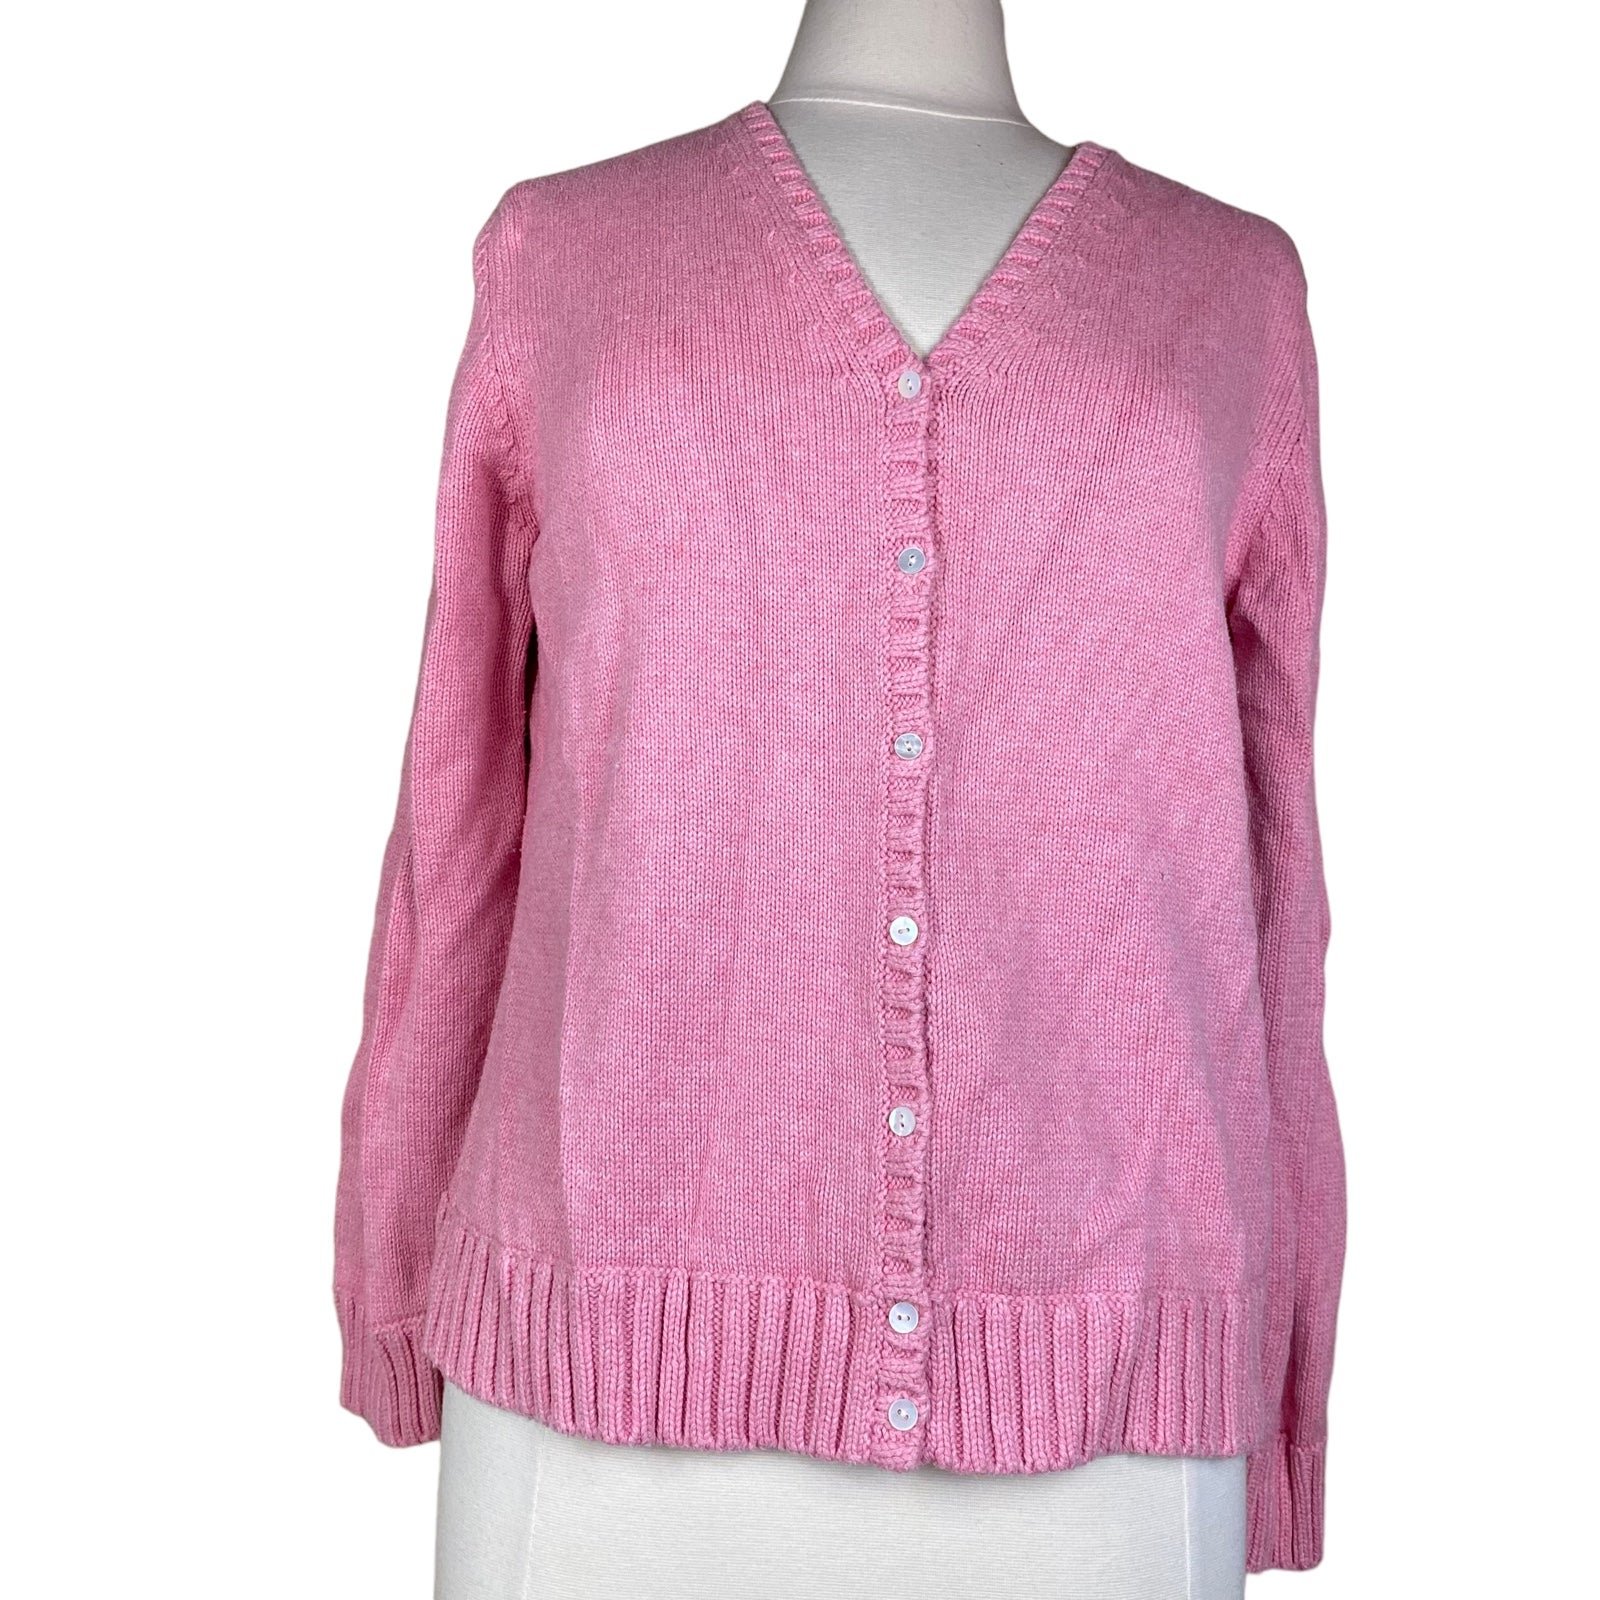 High quality Lands End Cardigan Sweater PINK Barbiecore